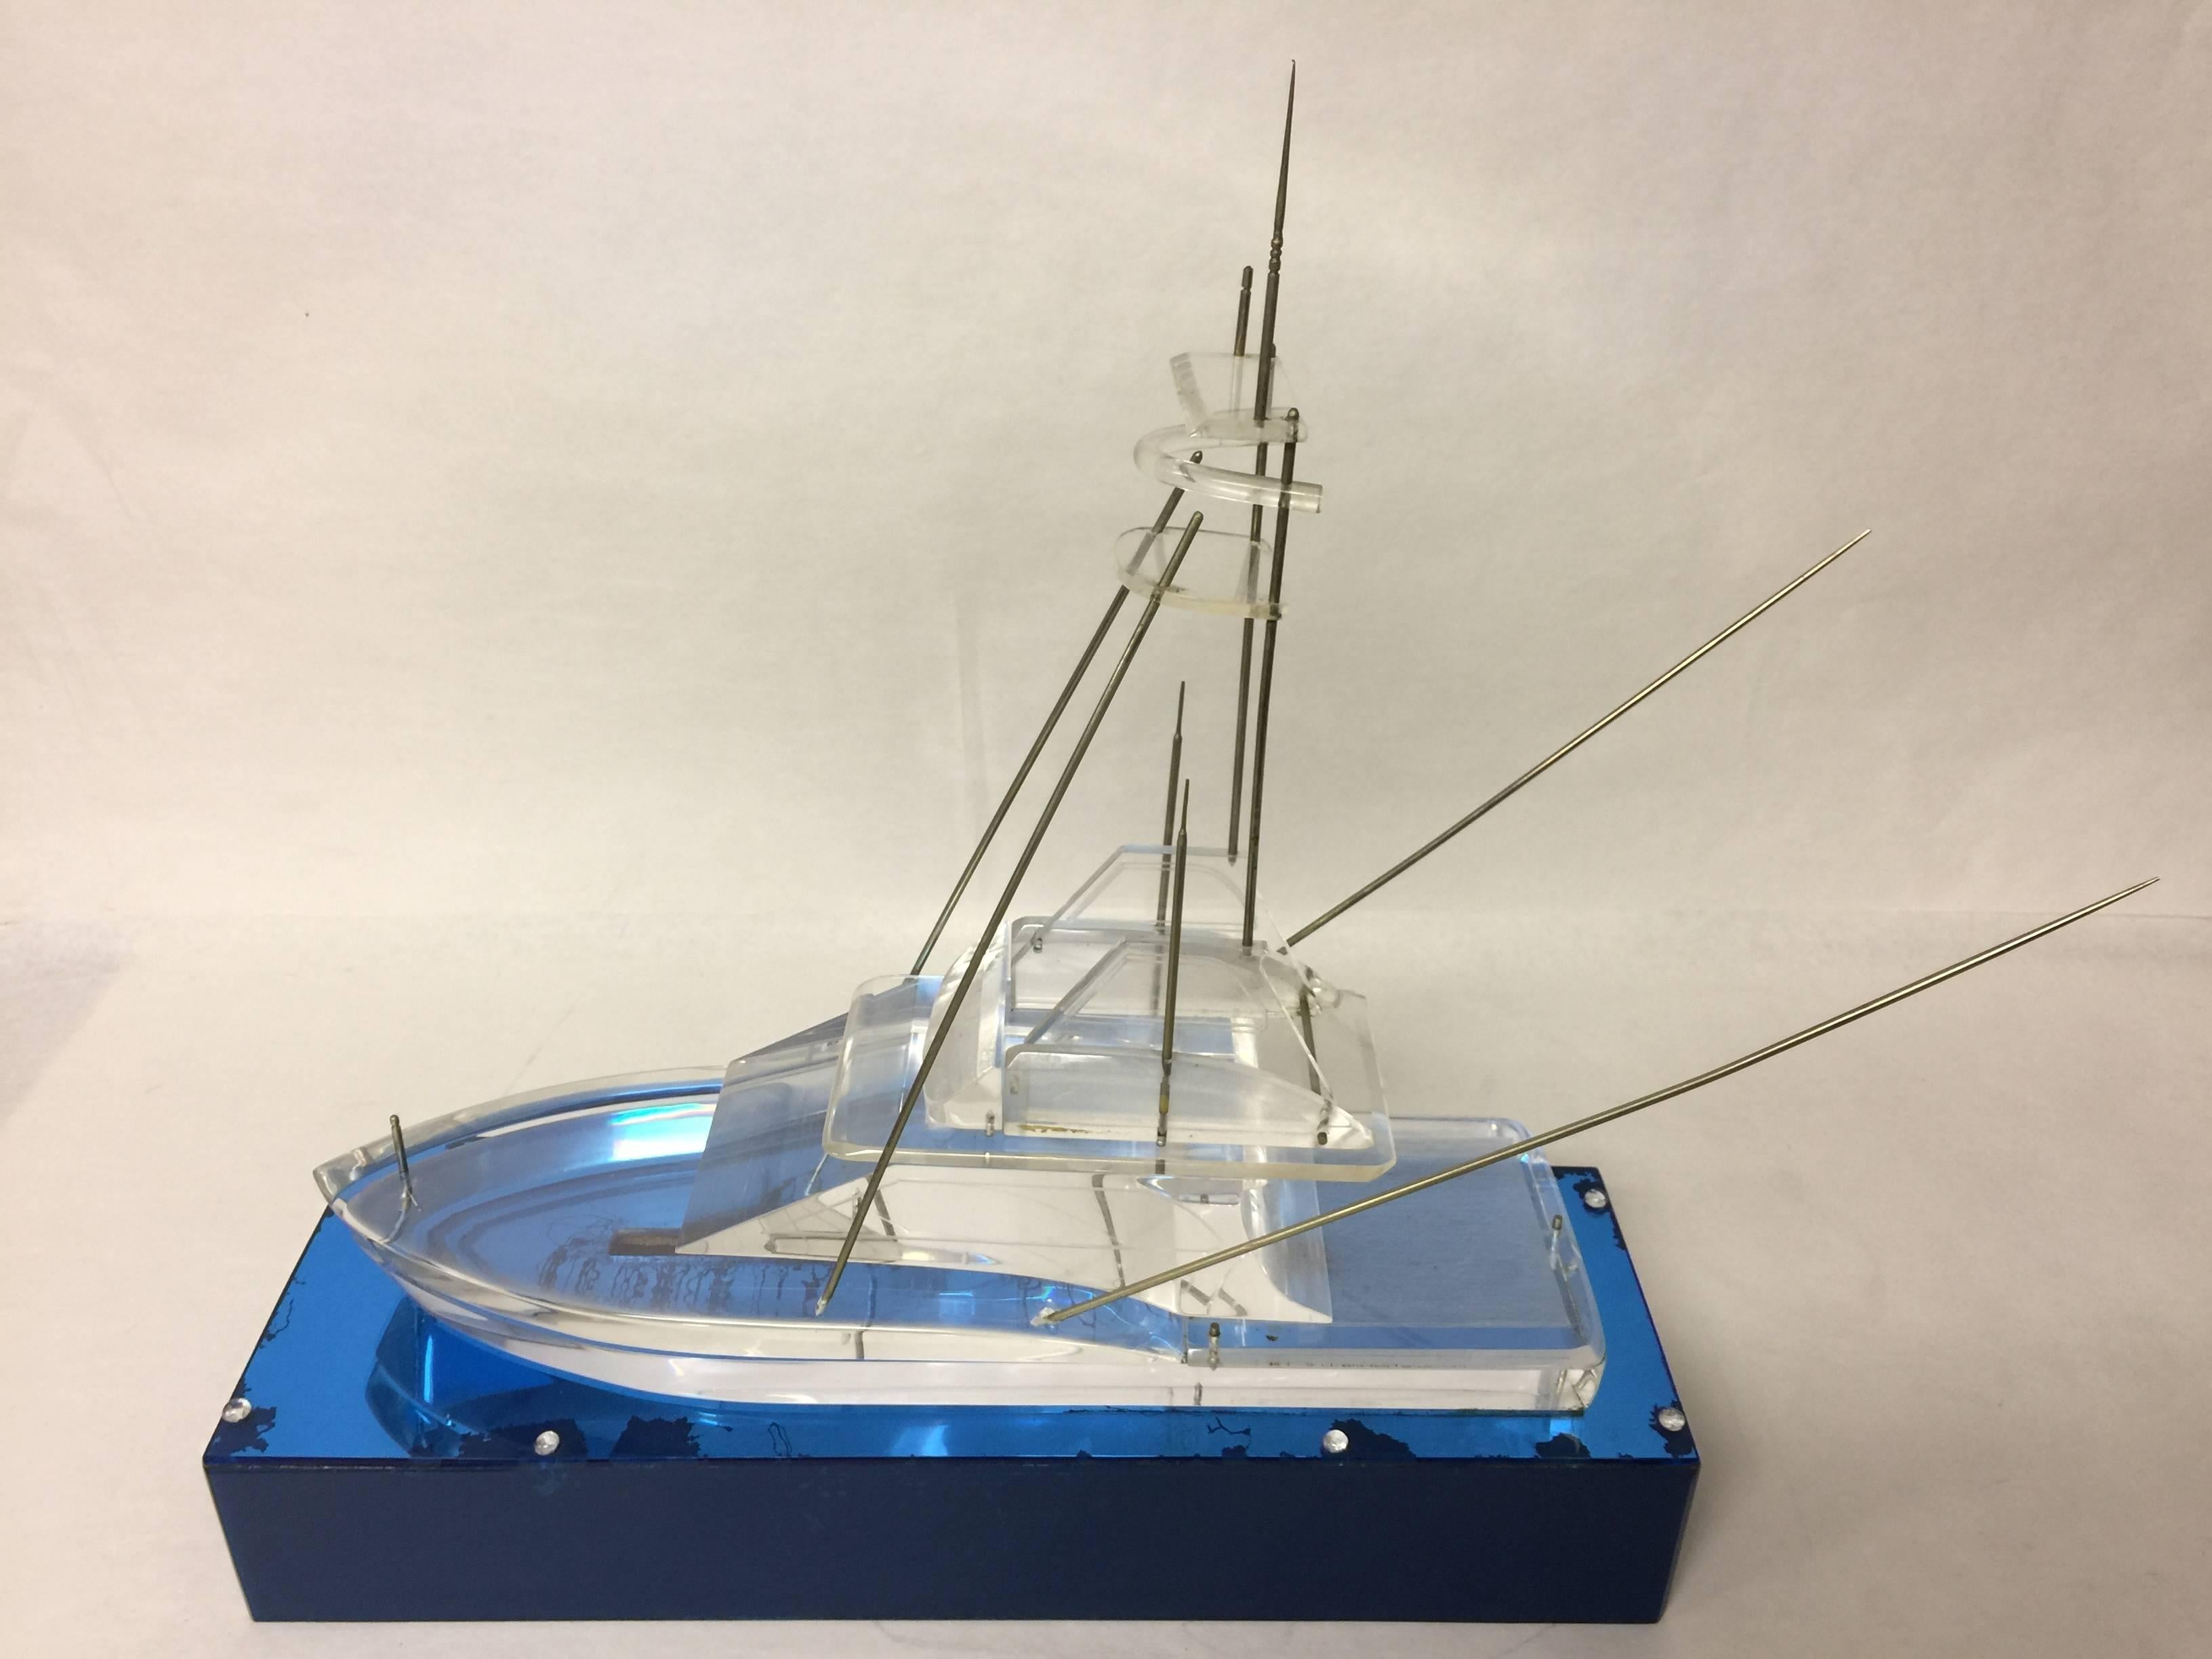 Ready to reel in the big one? Here it is. This vintage Lucite deep sea fishing boat model sits atop a blue Lucite base. Ahoy. The base measures: 20